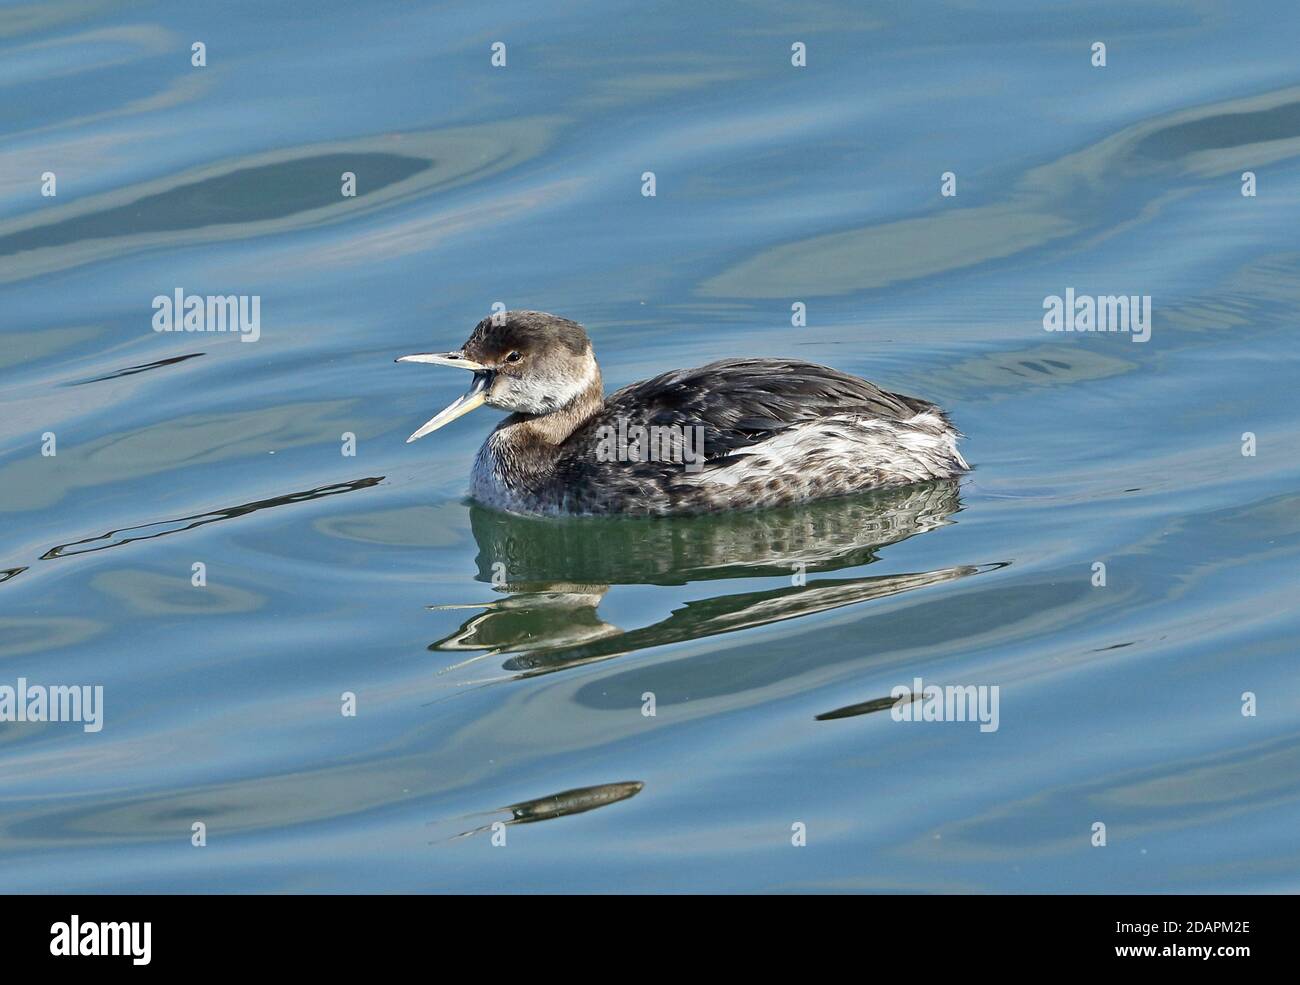 Red-necked Grebe (Podiceps grisegena holbollii) winter plumage adult yawning while swimming in harbour  Choshi, Chiba Prefecture, Japan        Februar Stock Photo